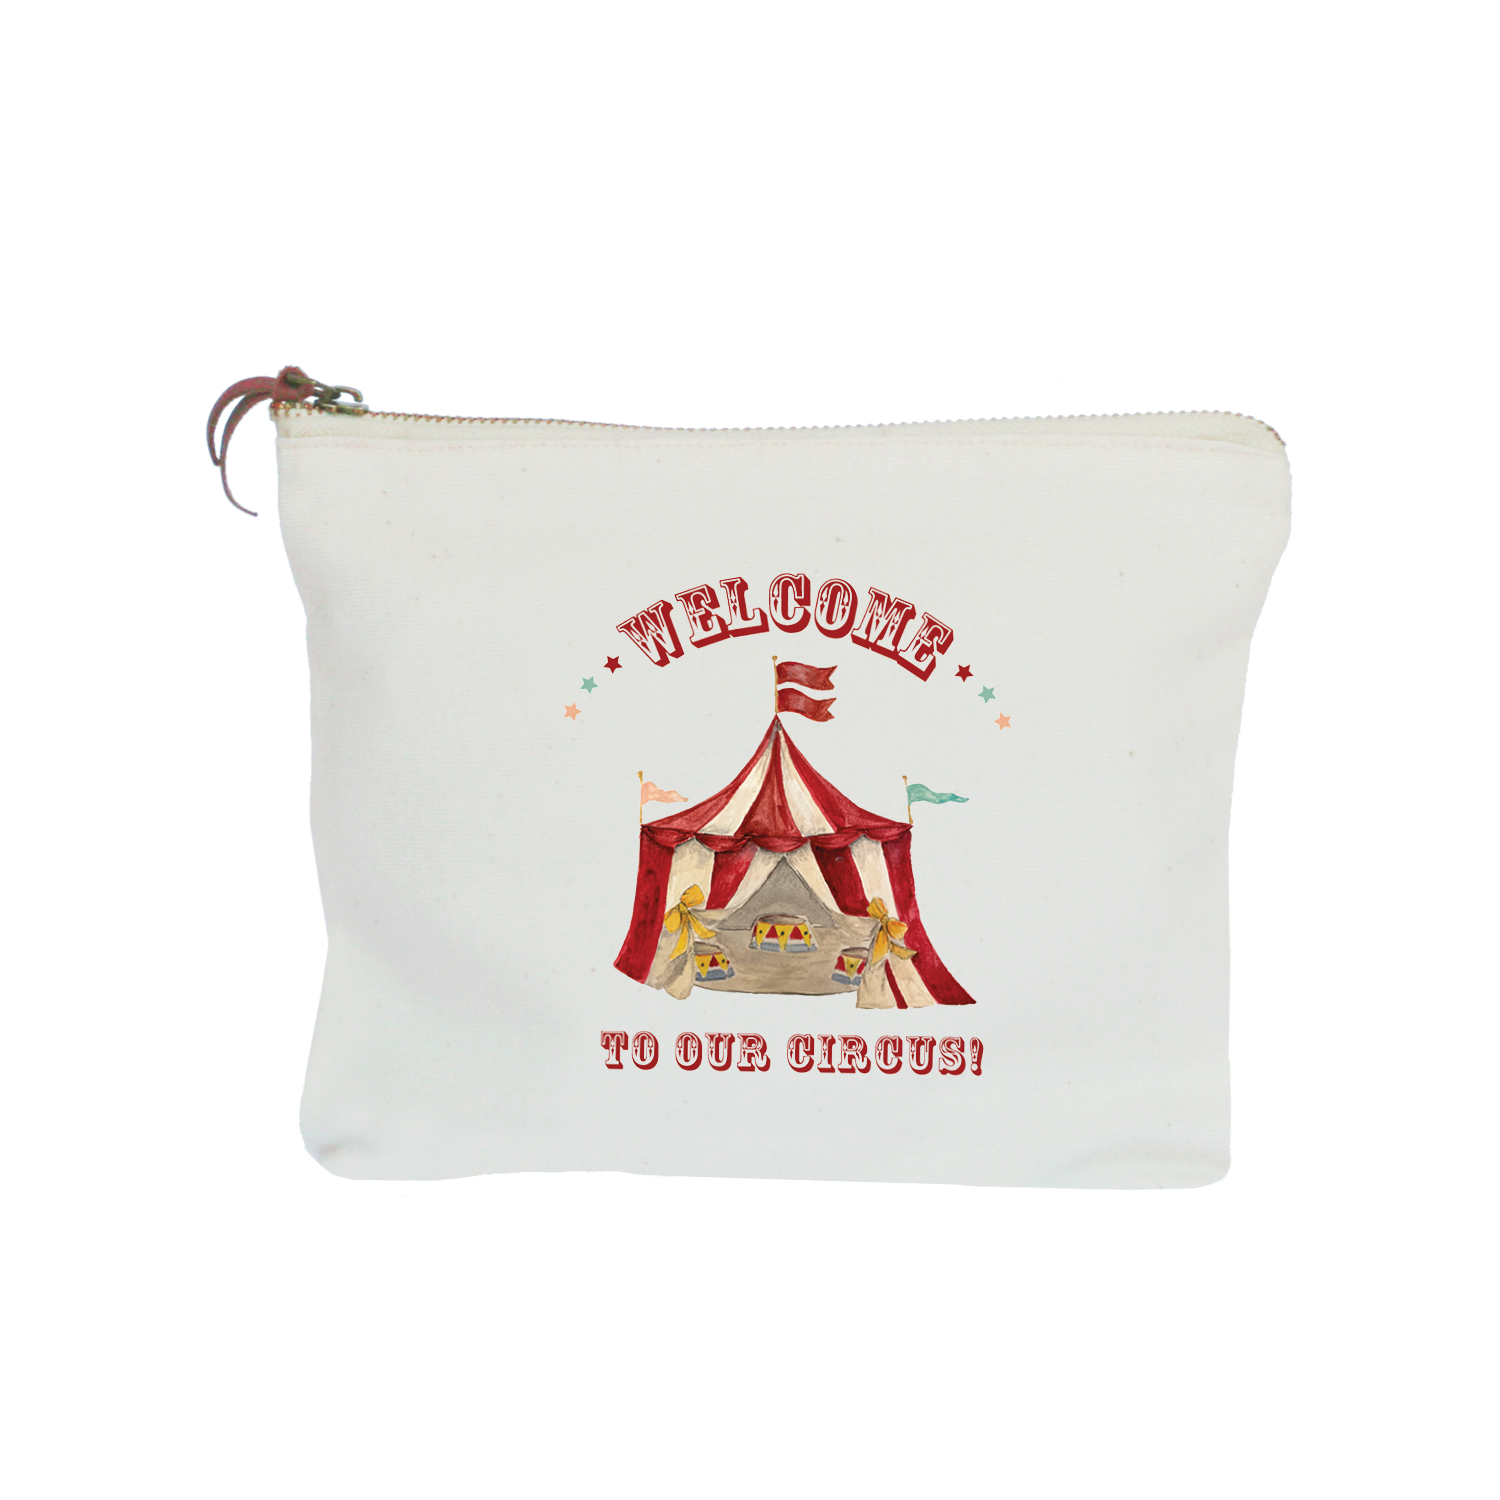 welcome to our circus zipper pouch